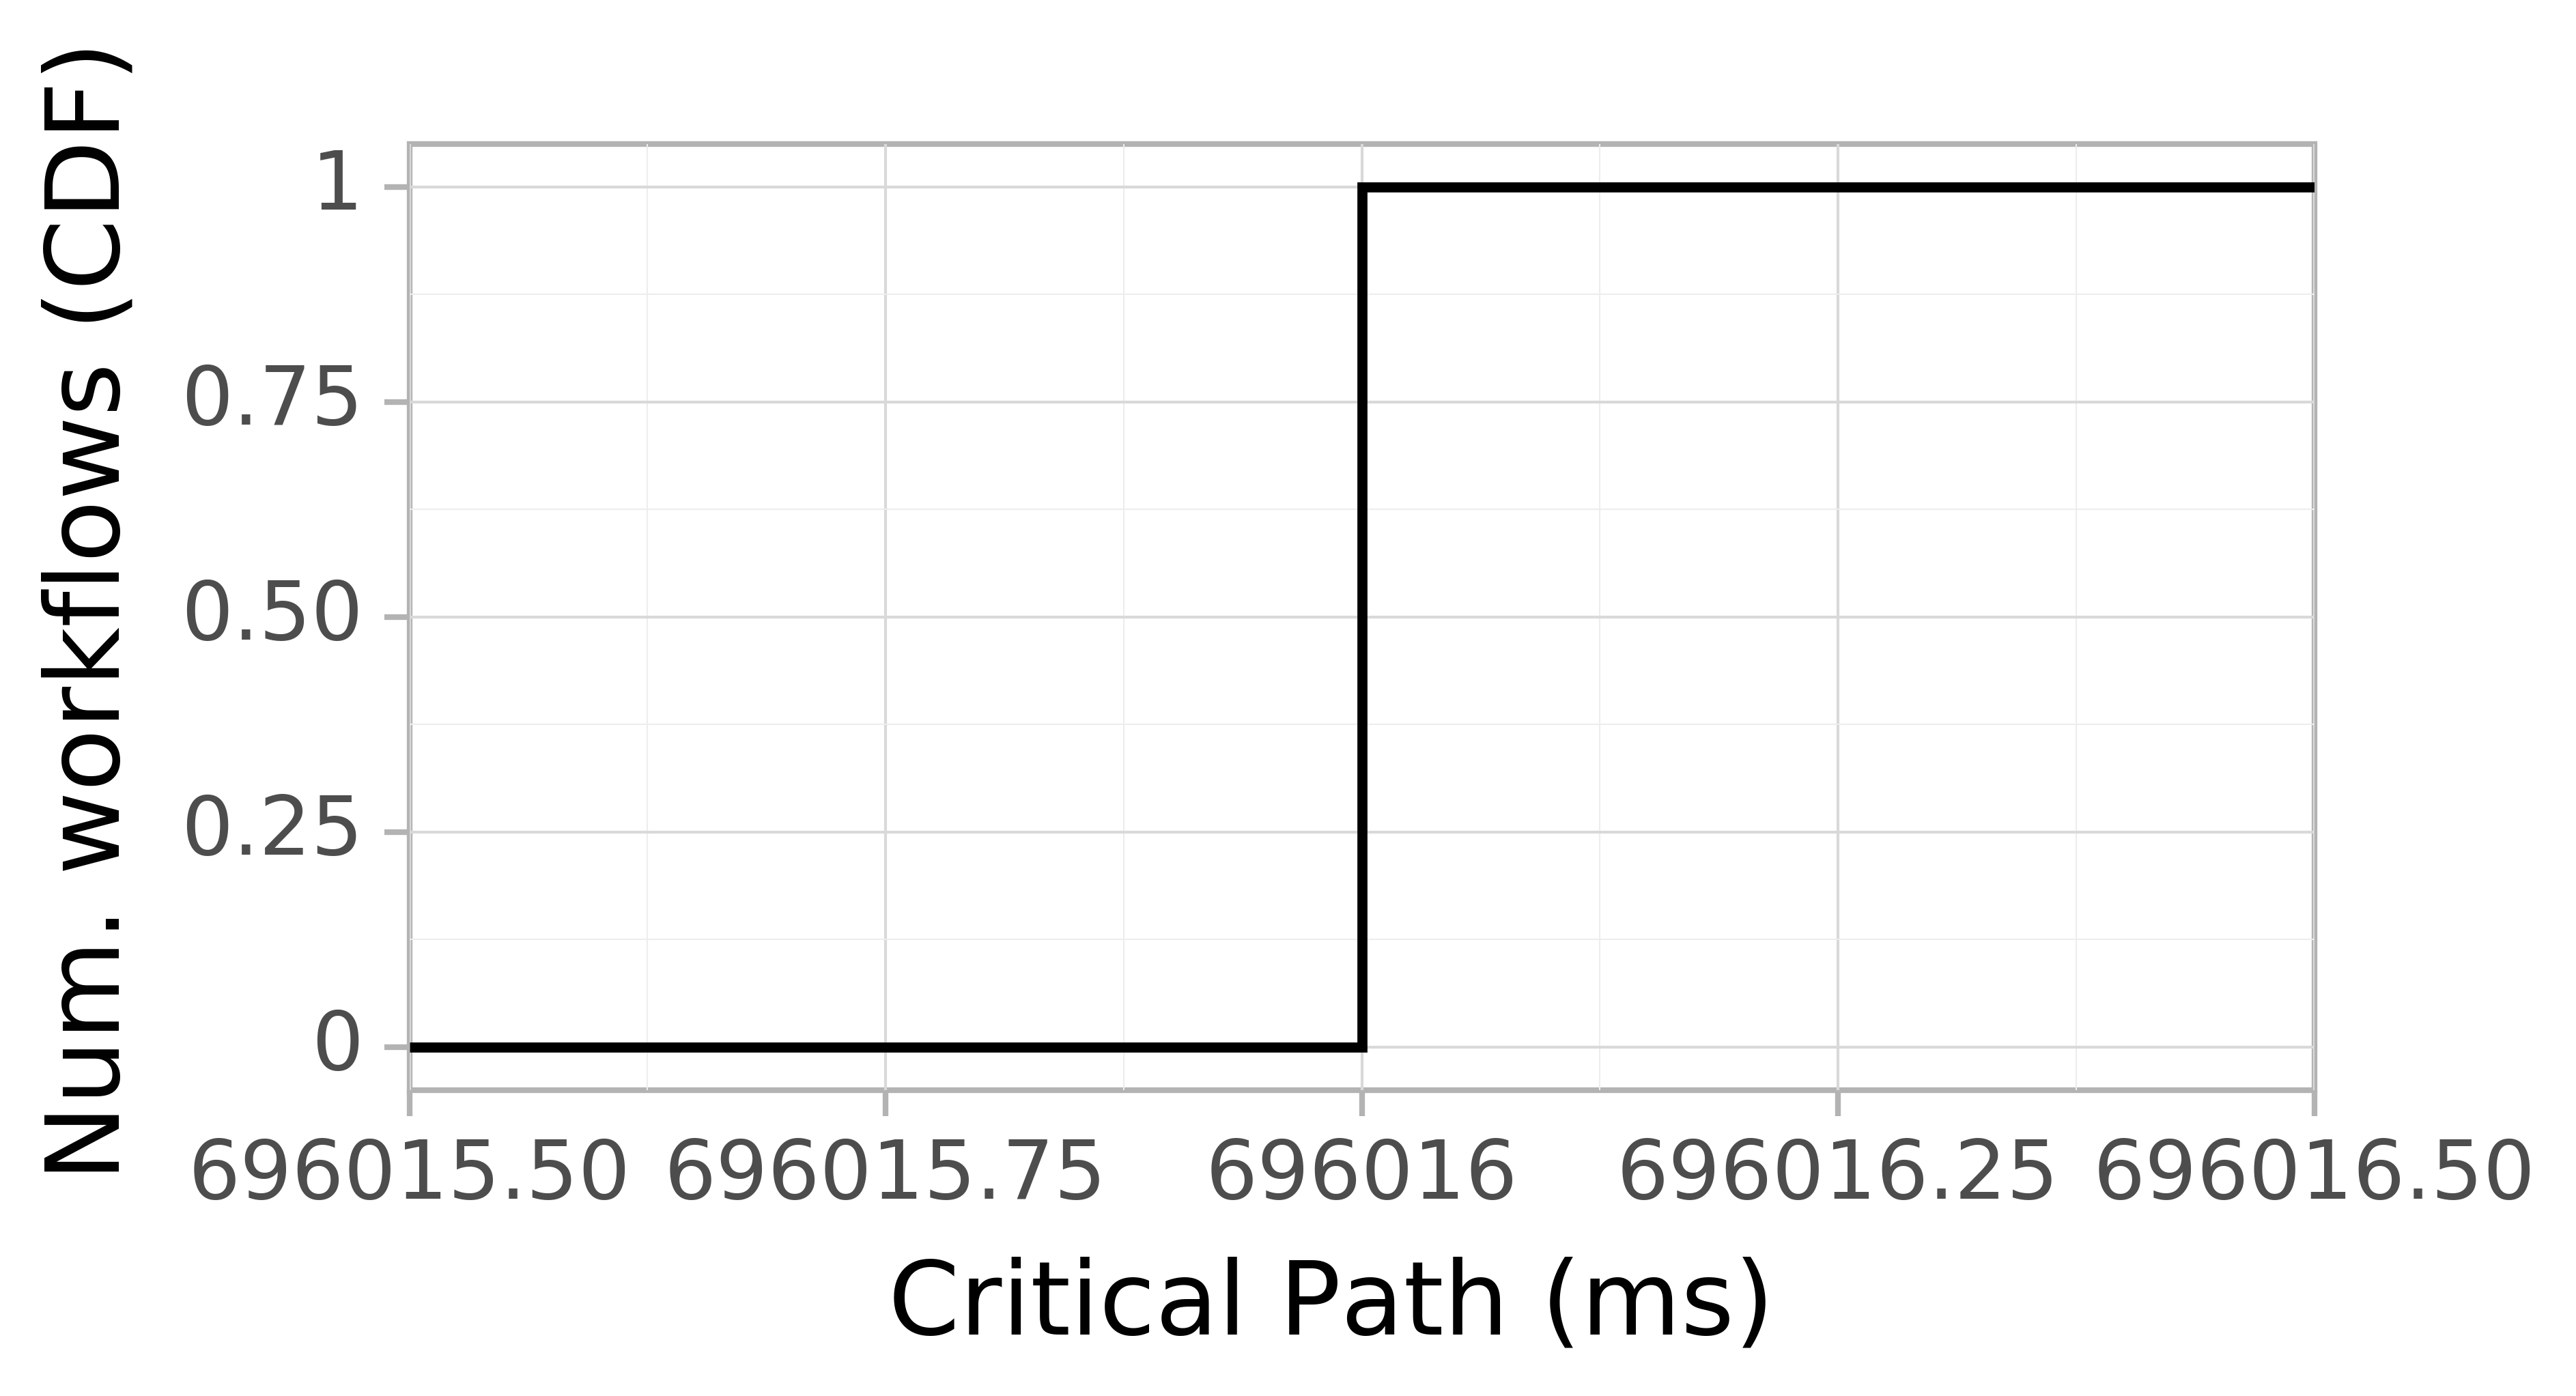 Job runtime CDF graph for the Pegasus_P6b trace.